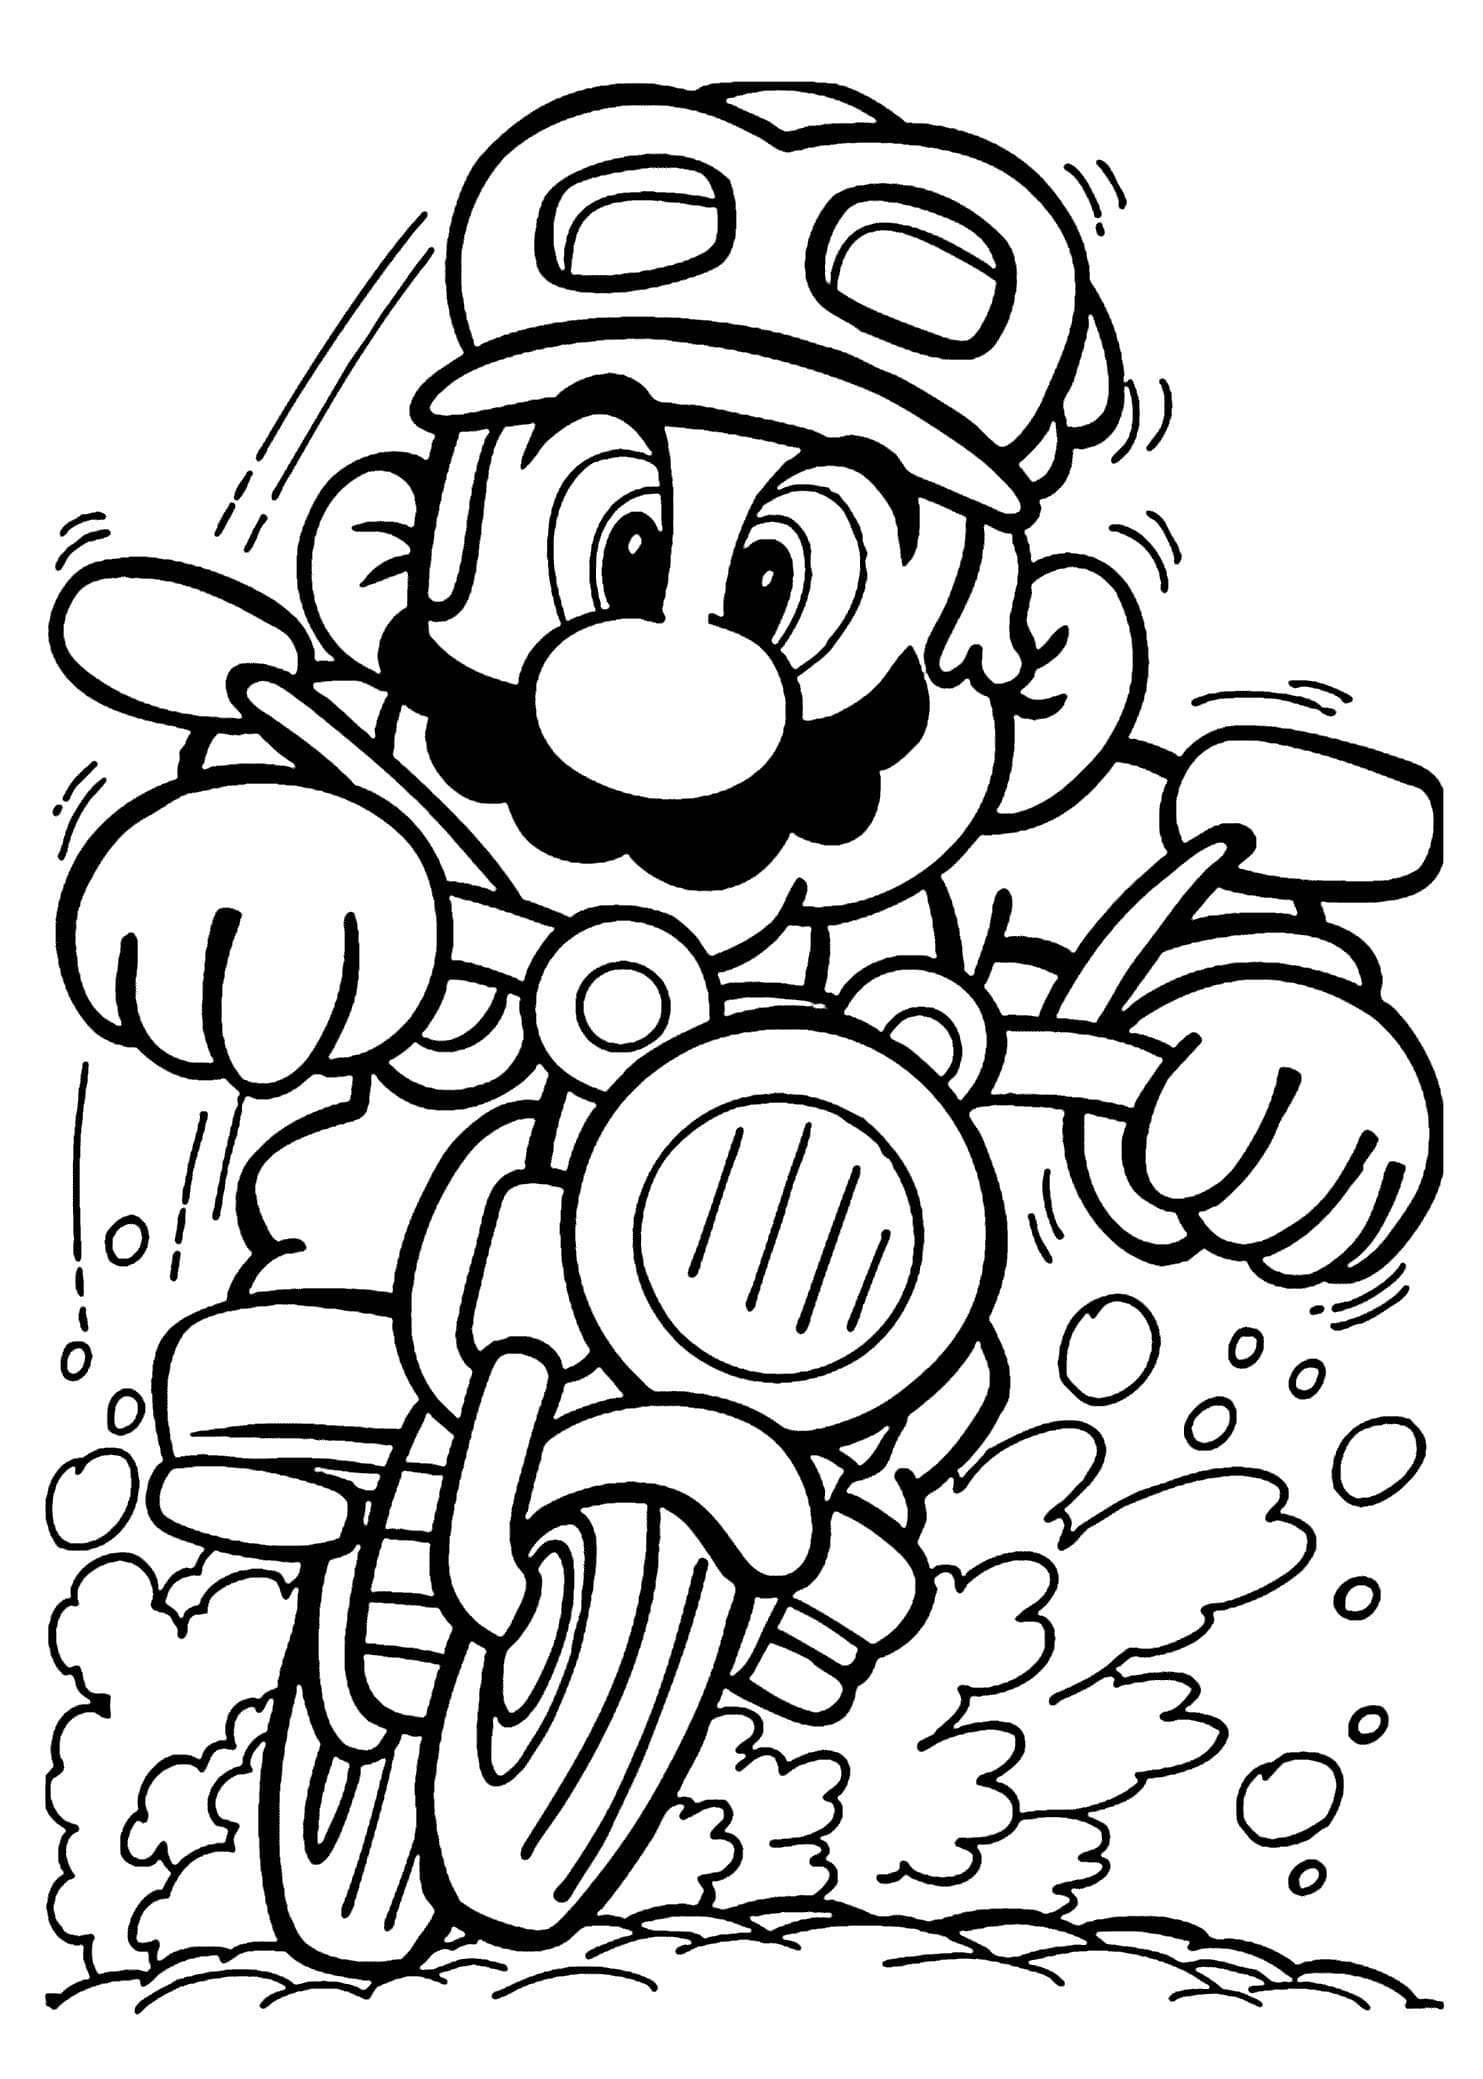 Drawing 03 of Super Mario to print and color